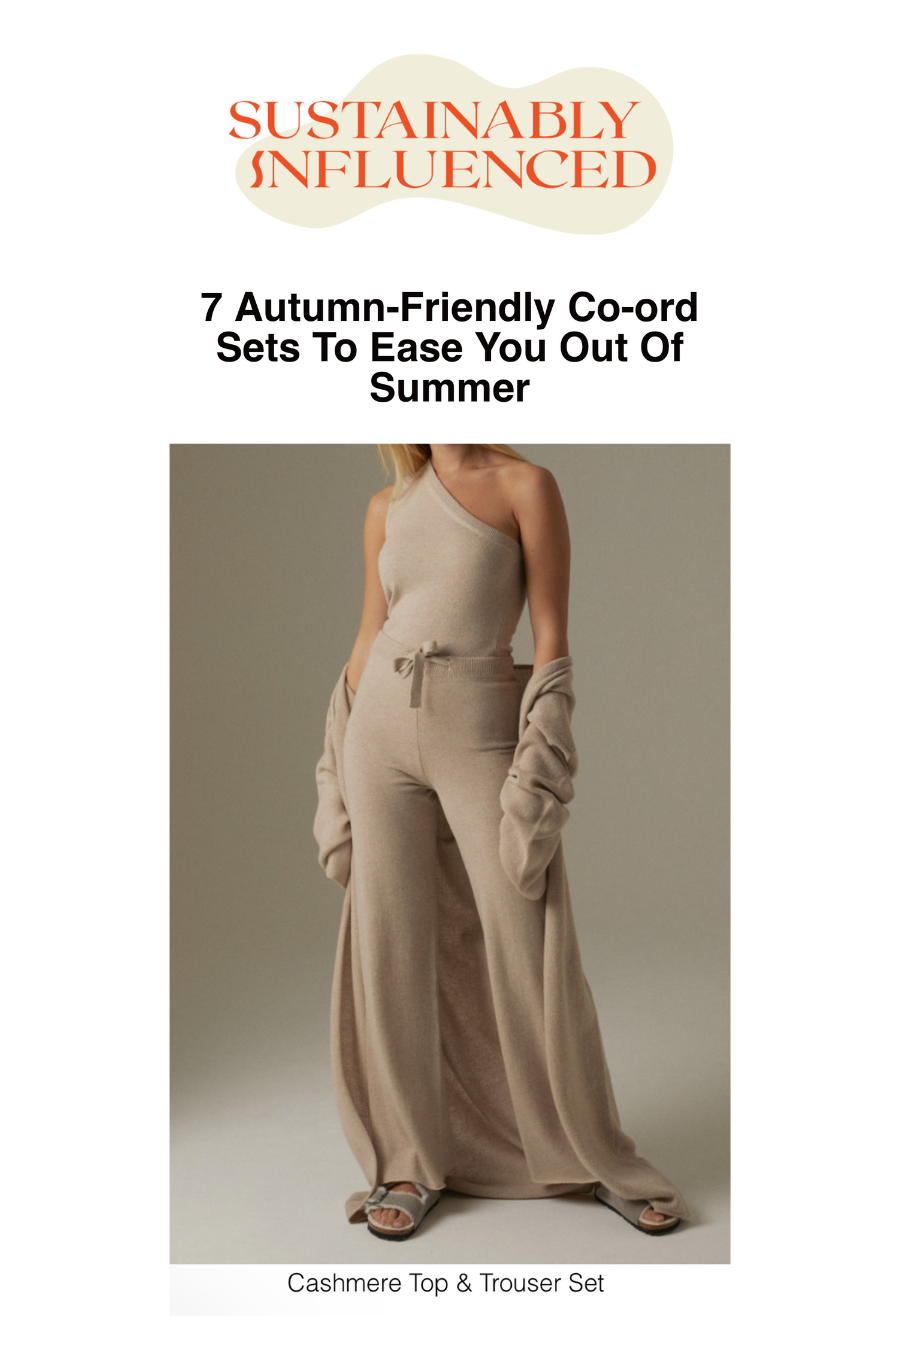 SUSTAINABLY INFLUENCED | 7 Autumn-Friendly Co-ord Sets To Ease You Out Of Summer